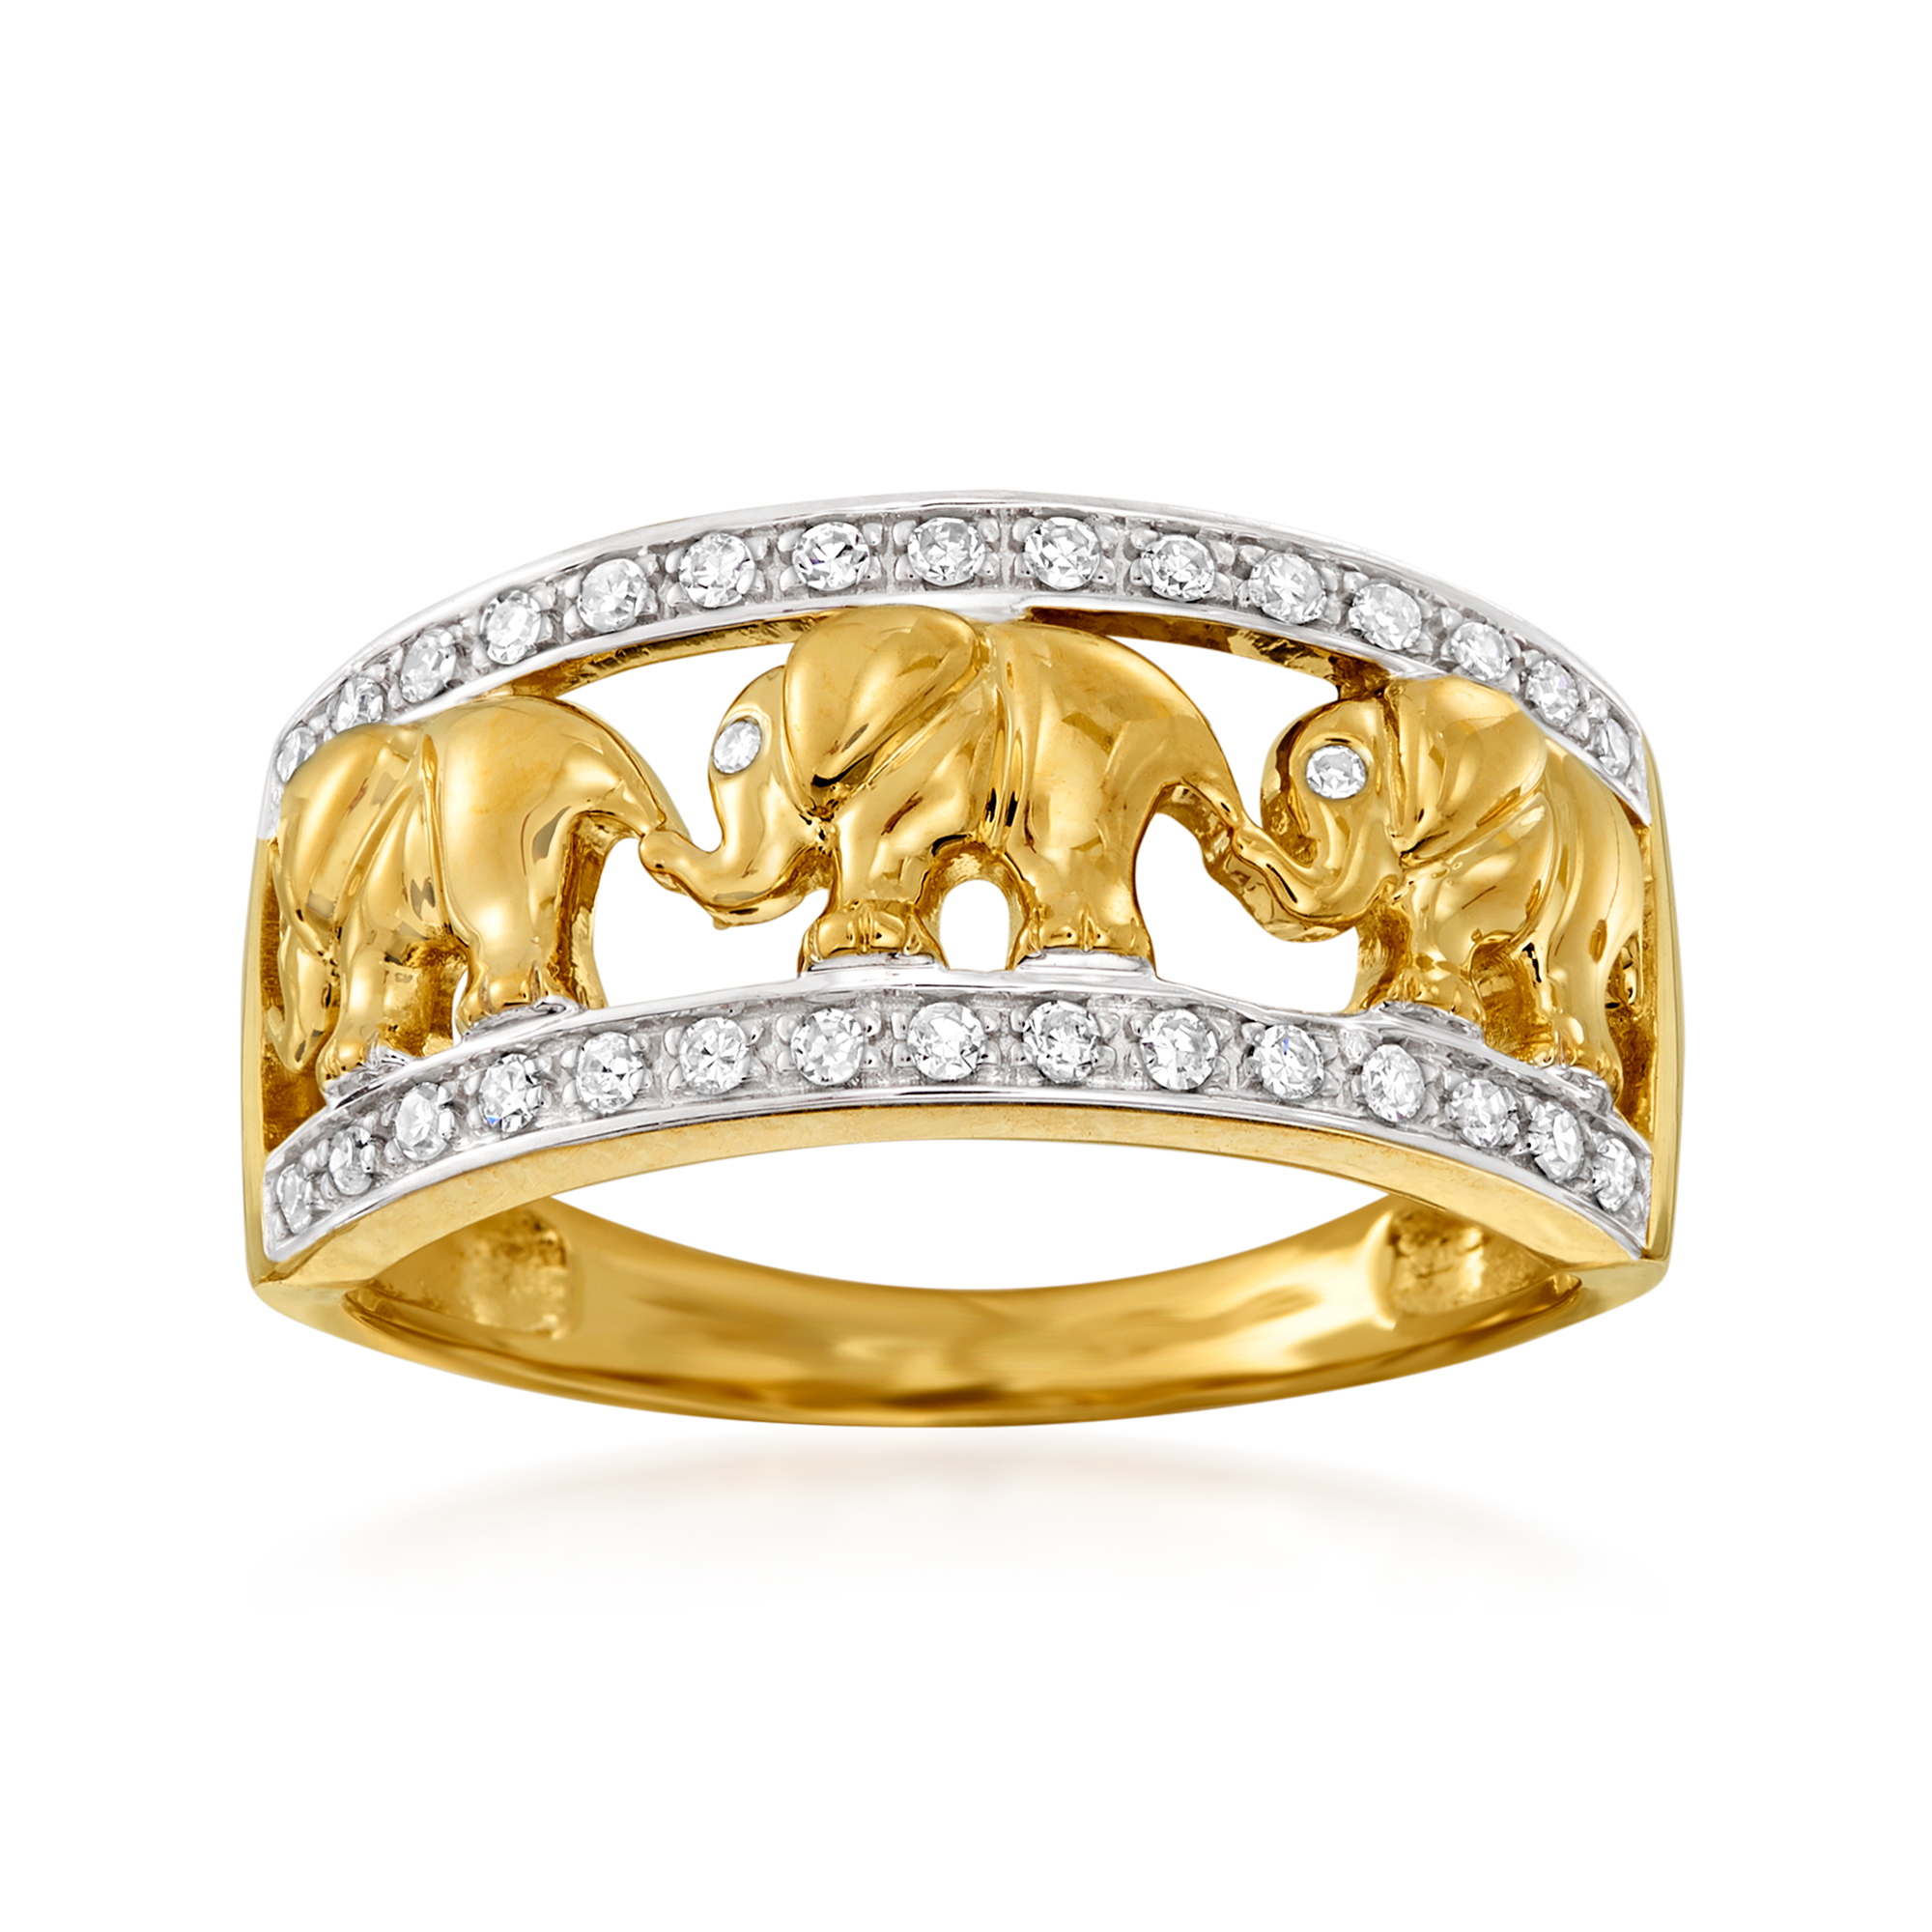 20 ct. t.w. Diamond Elephant Ring in 14kt Yellow Gold | Ross-Simons